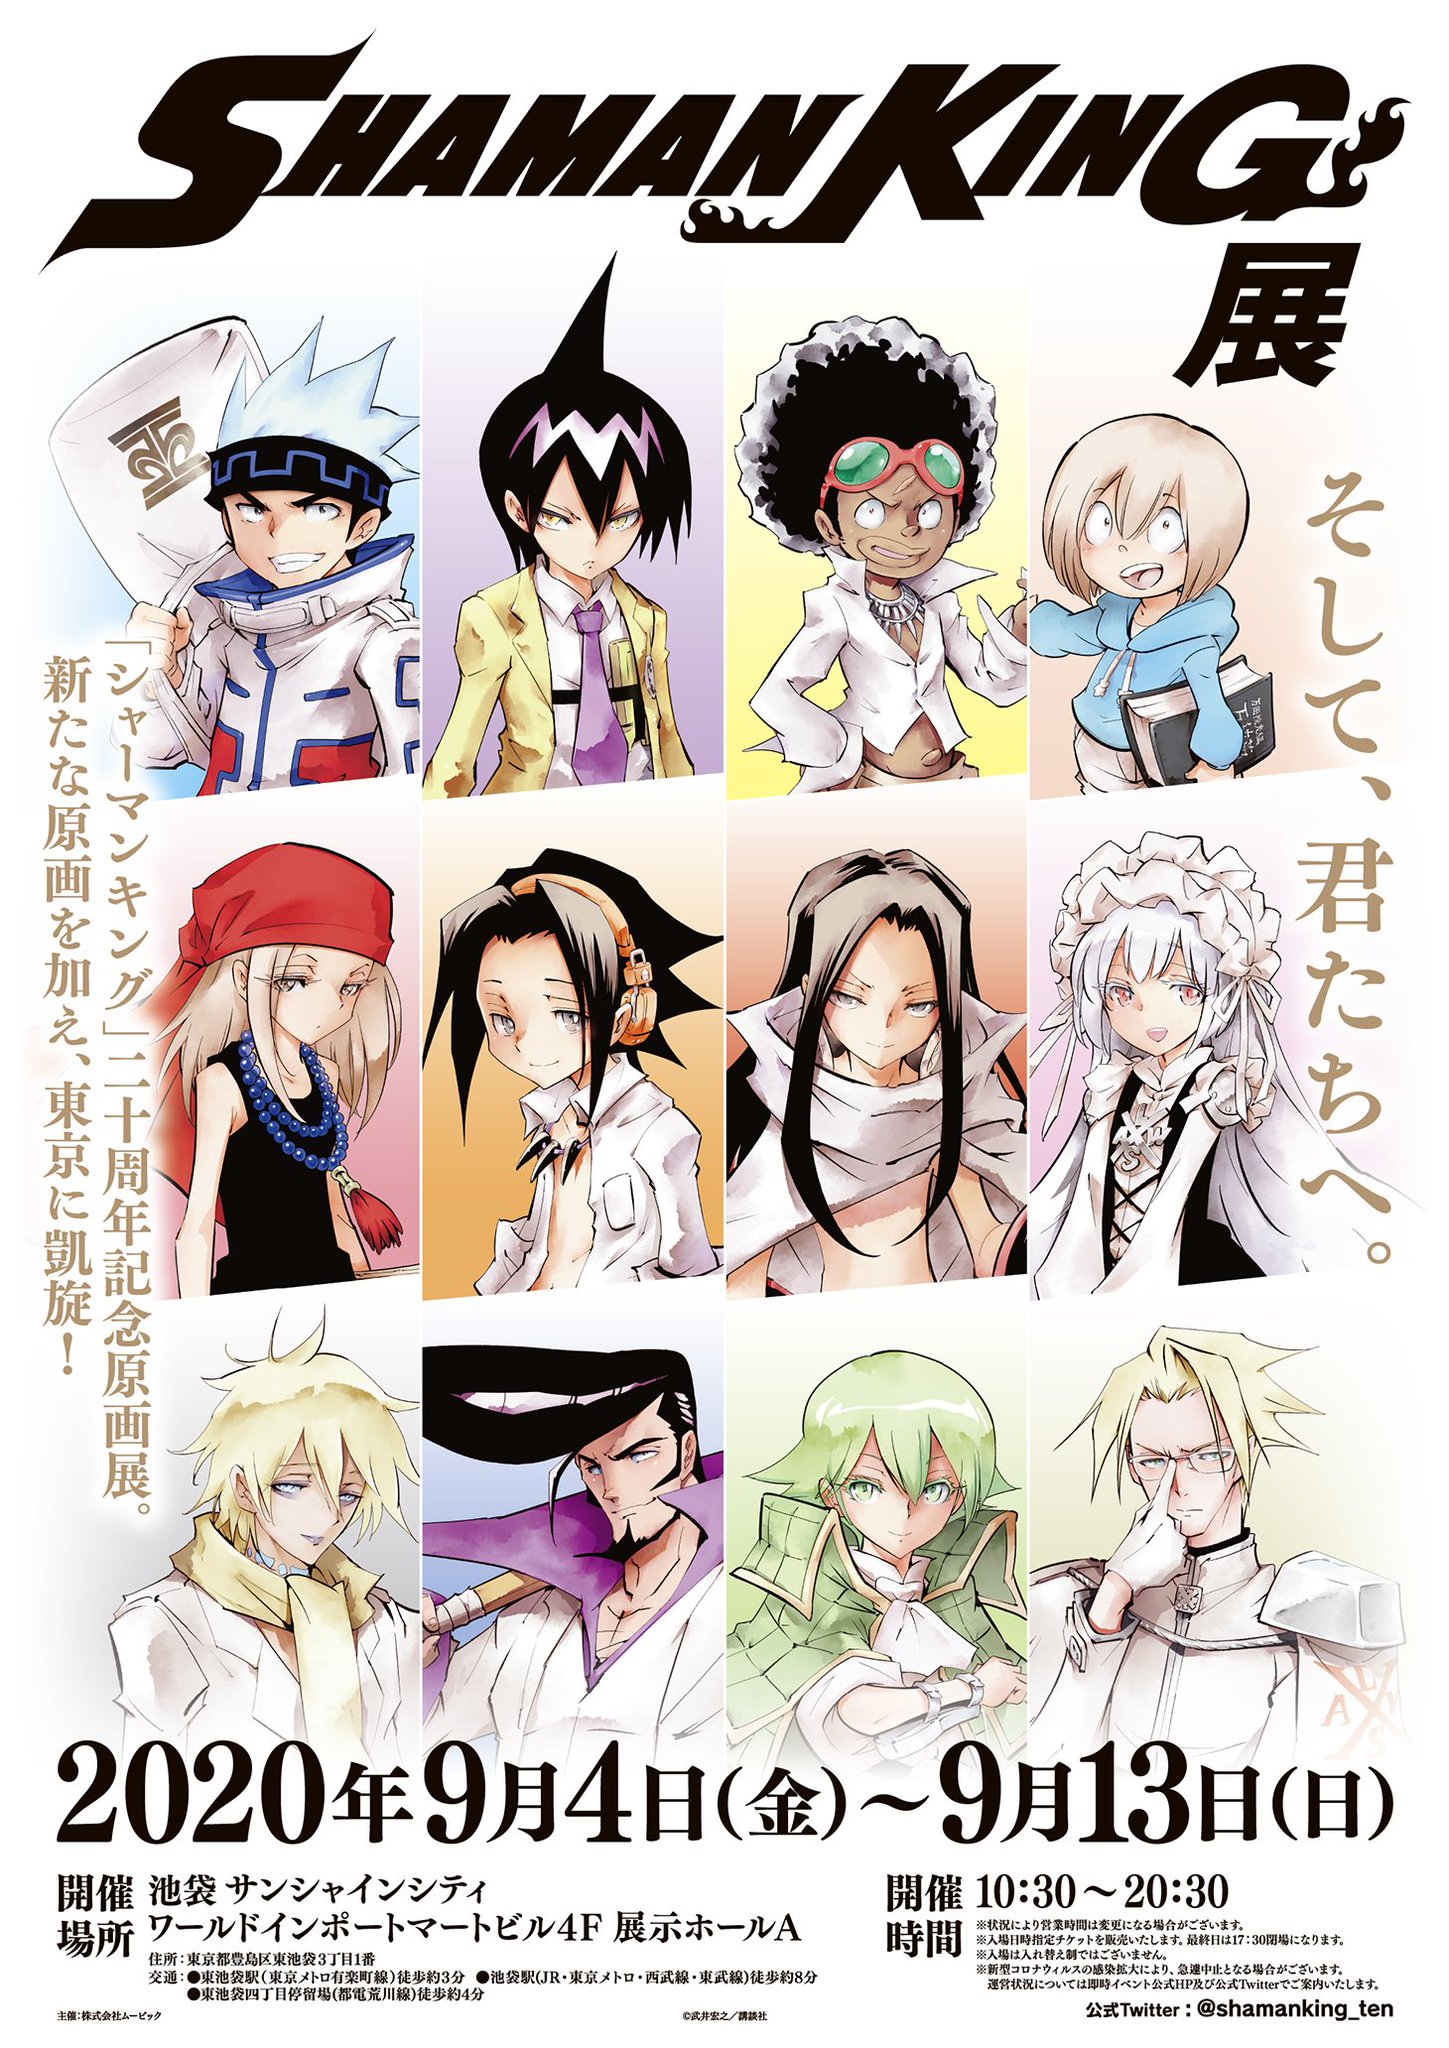 Patch Cafe Shaman King News Feed Su Twitter The Shaman King Exhibition Tokyo Triumphal Return Venue And Dates Have Been Announced Via Shamanking Ten It Will Take Place September 4th Through 13th